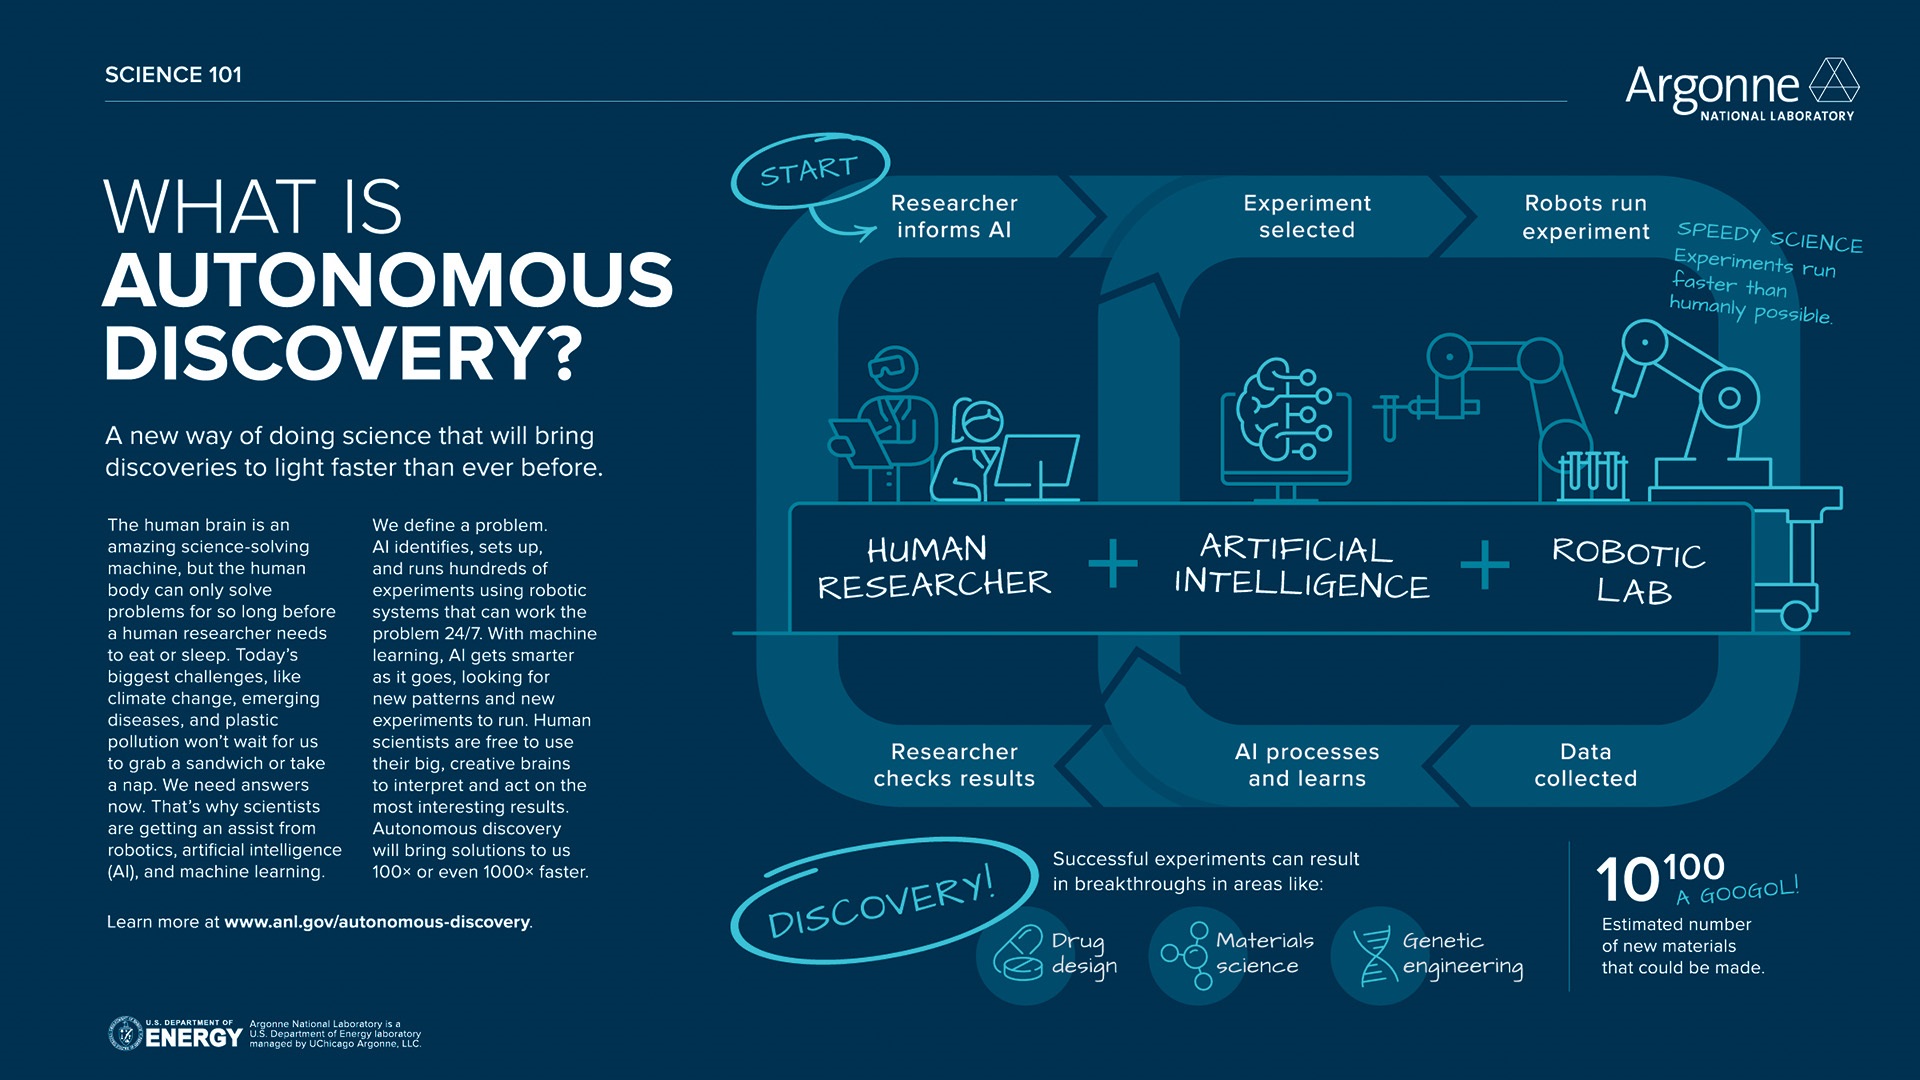 Science 101: Autonomous Discovery infographic with white text and images on blue background